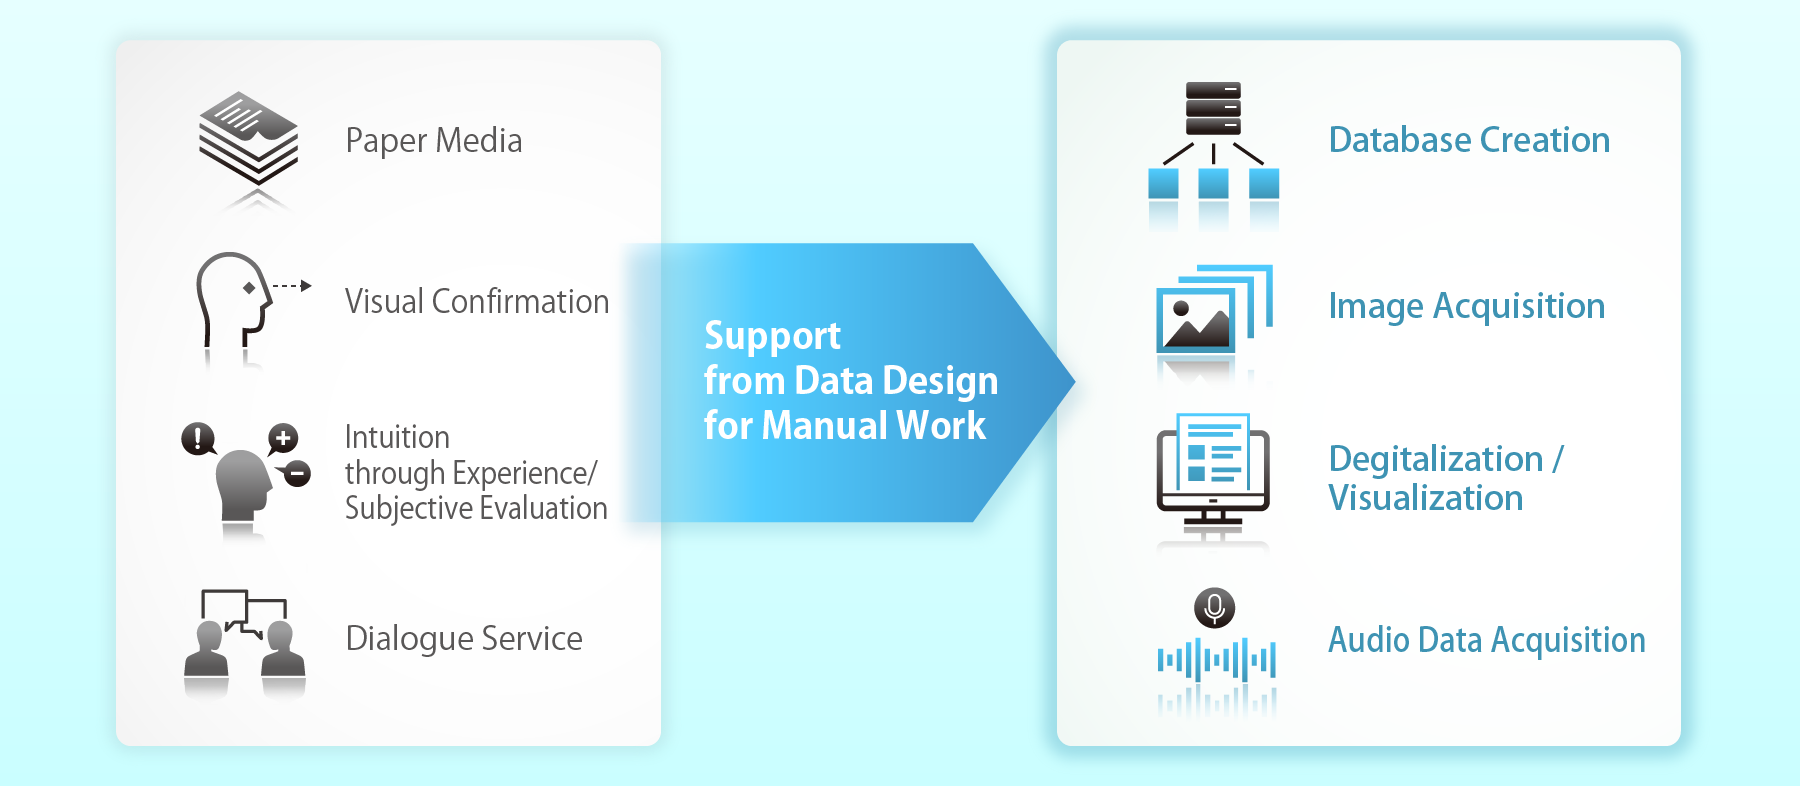 Support from Data Design for Manual Work